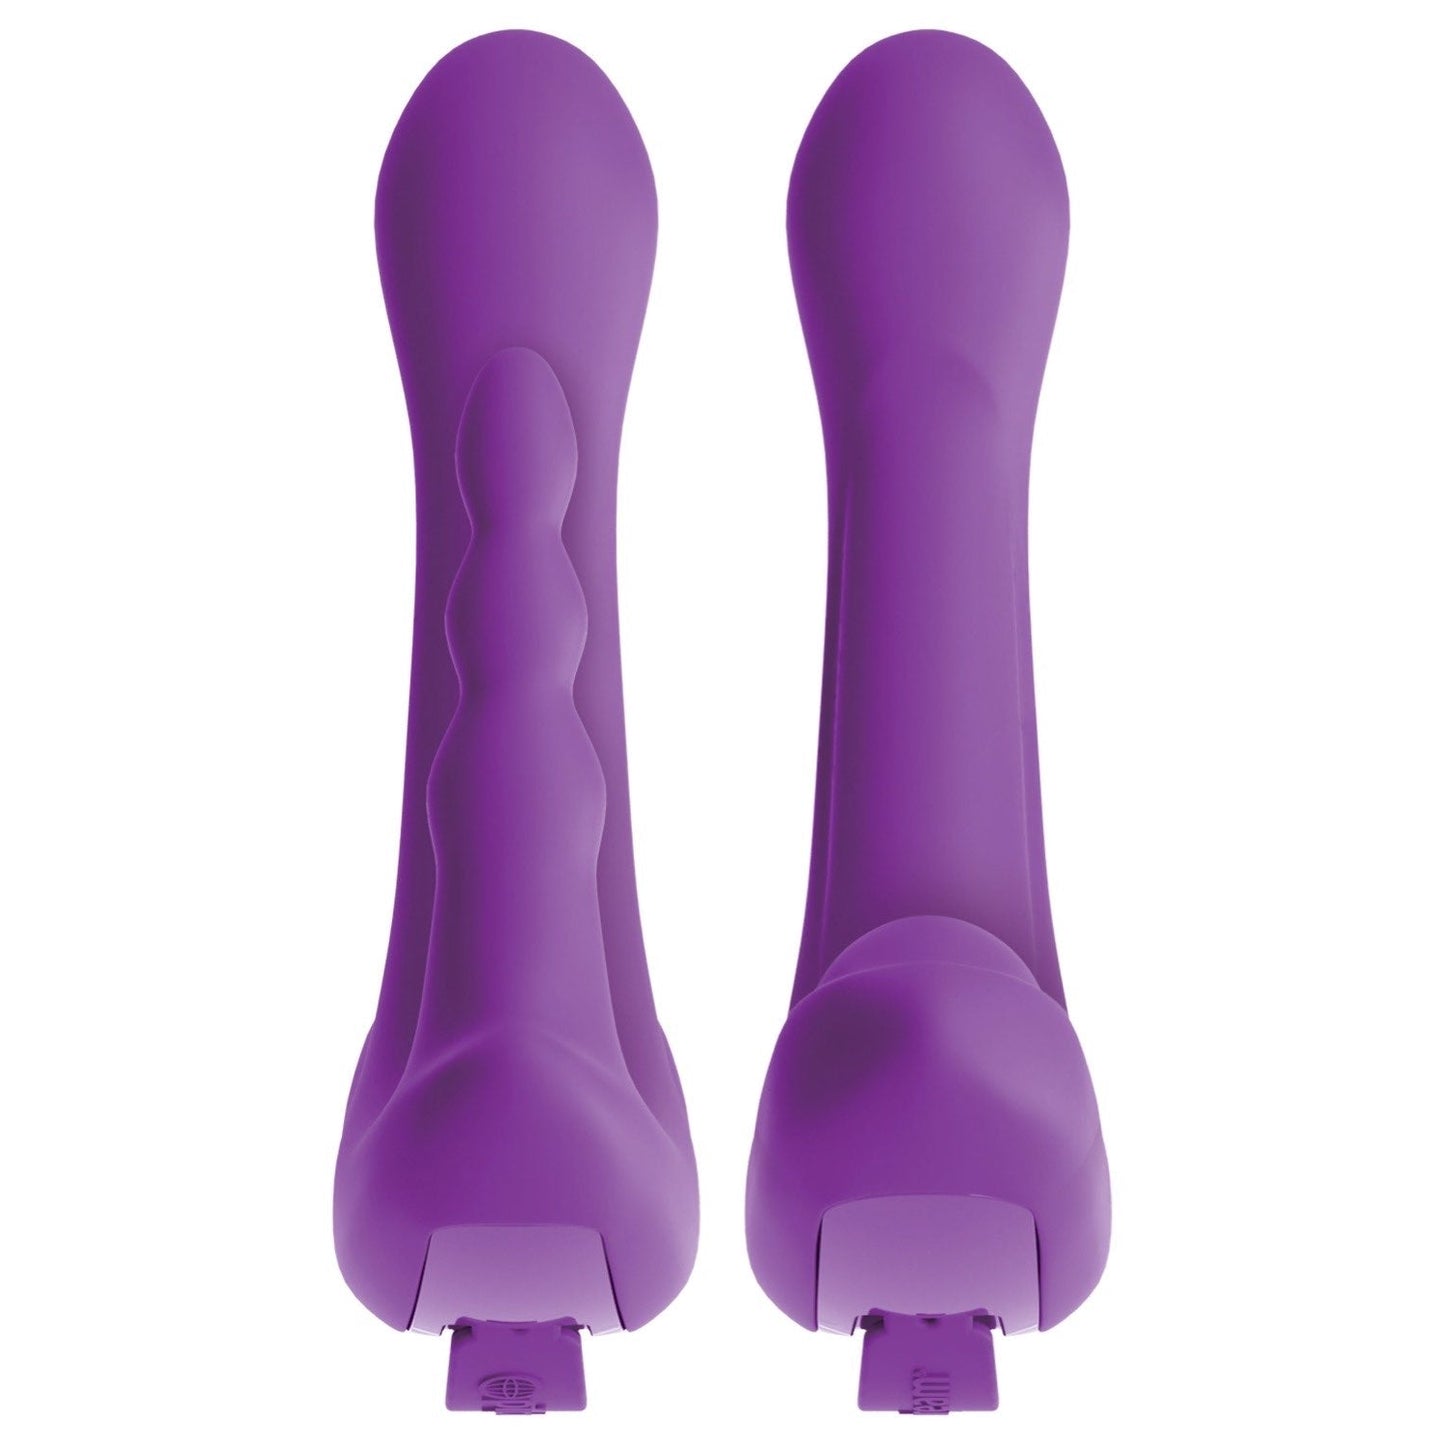 Rock N Ride - Purple USB Rechargeable Stimulator with Wireless Remote